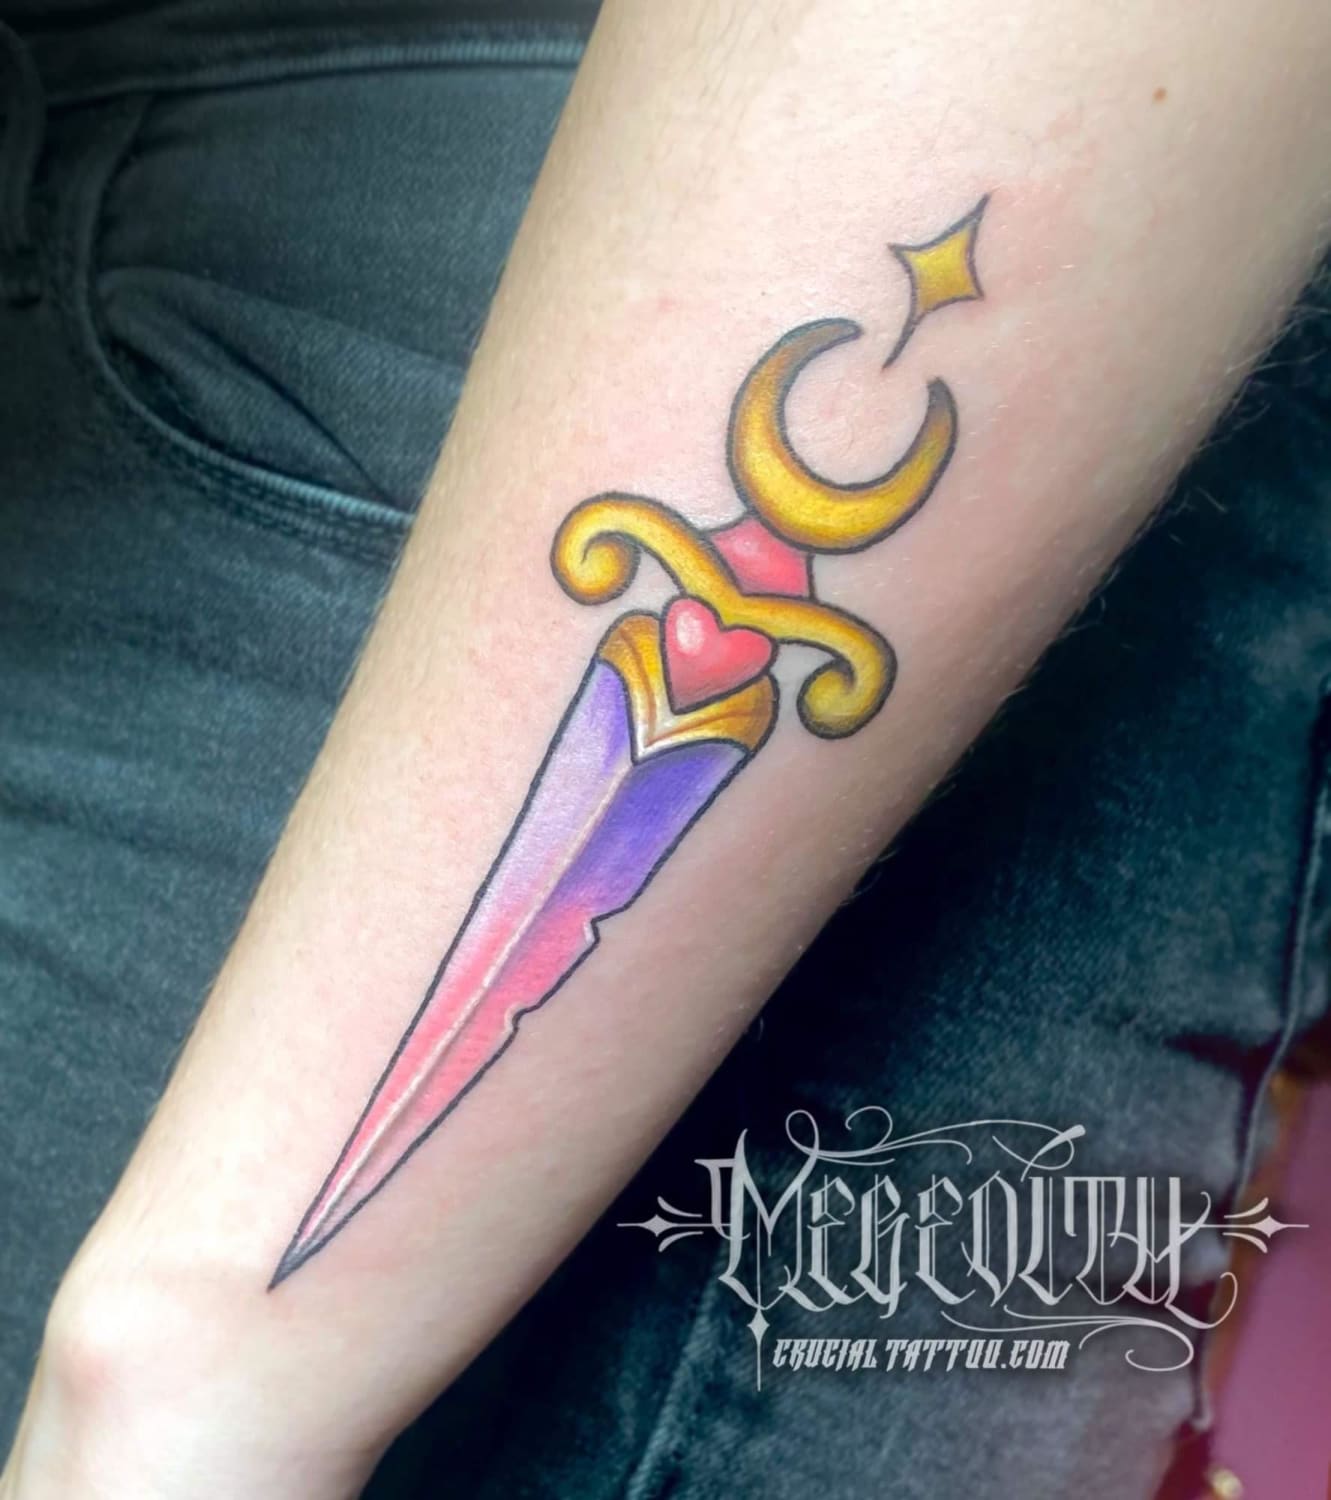 Sailor moon inspired knife done by Meredith Brewington at Crucial Tattoo Studio, Salisbury MD